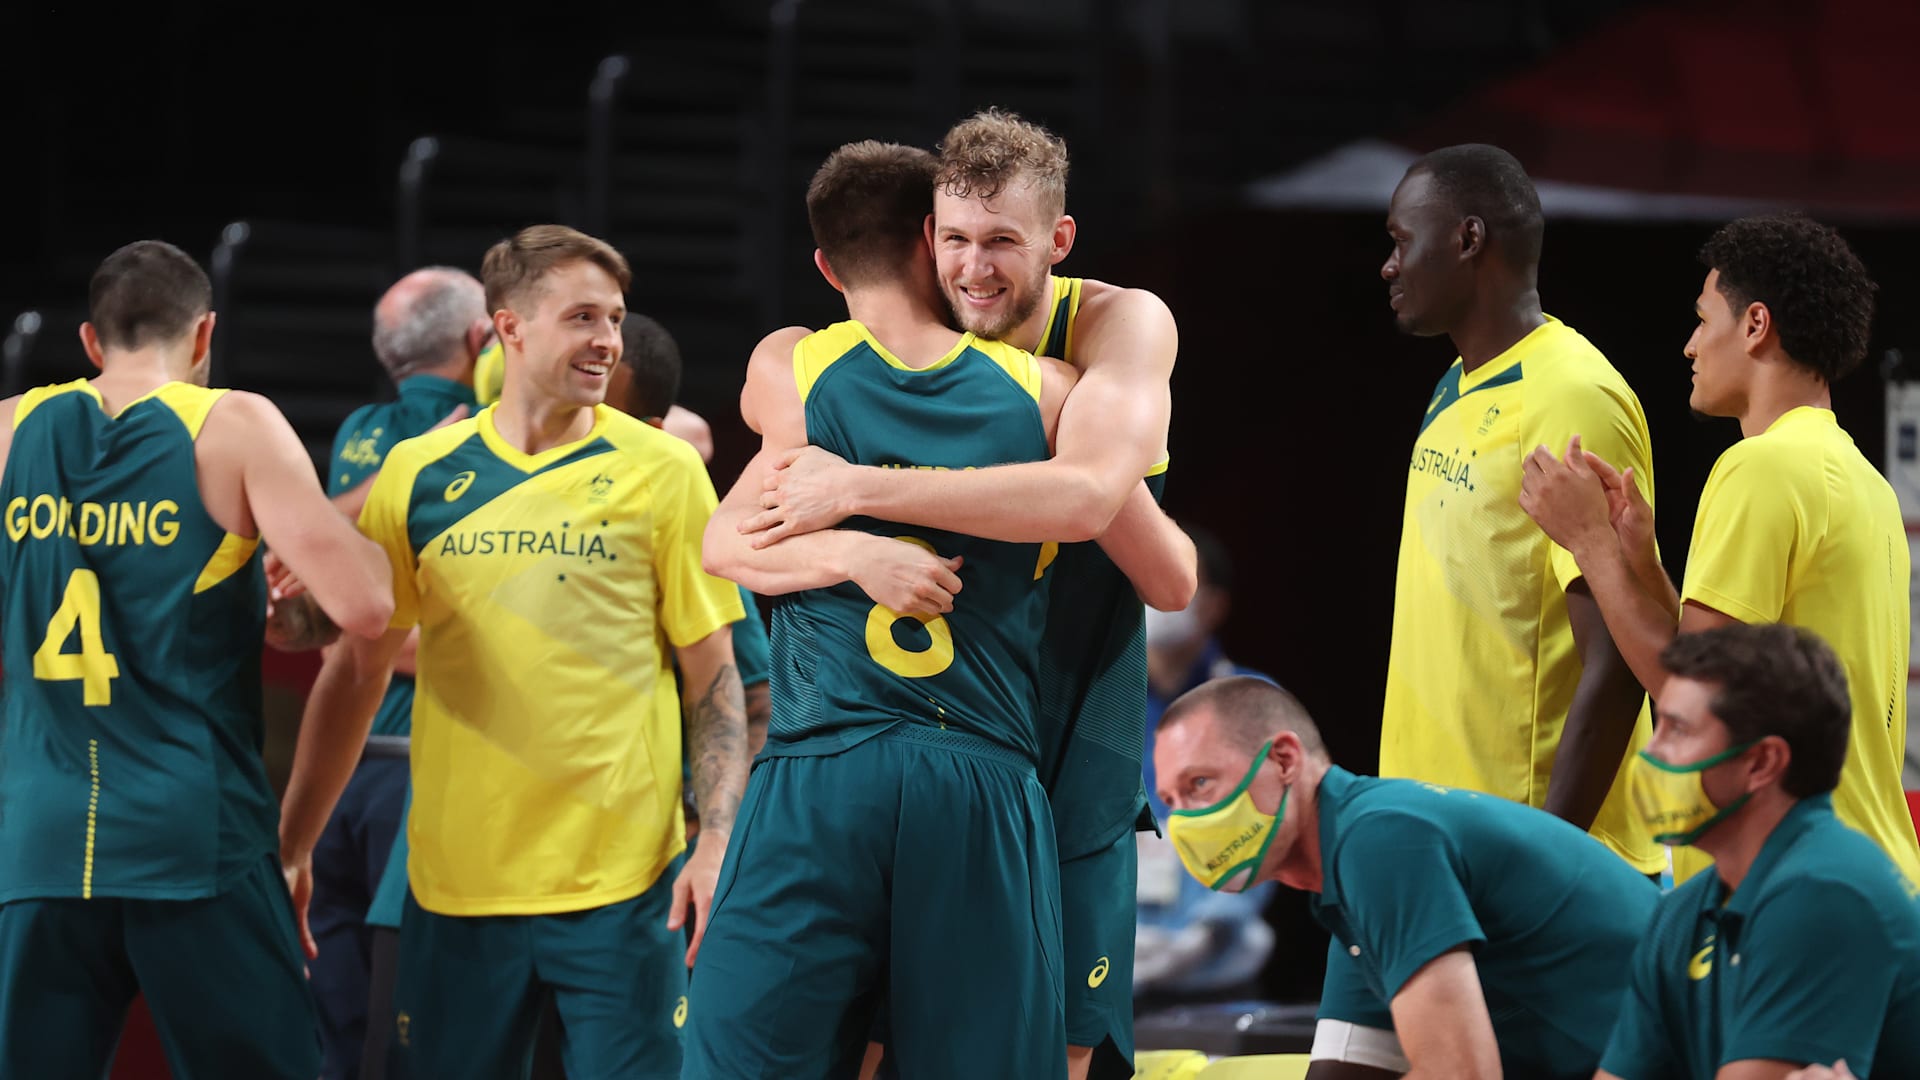 Bronzed: How the Australian Boomers made history and got their medal